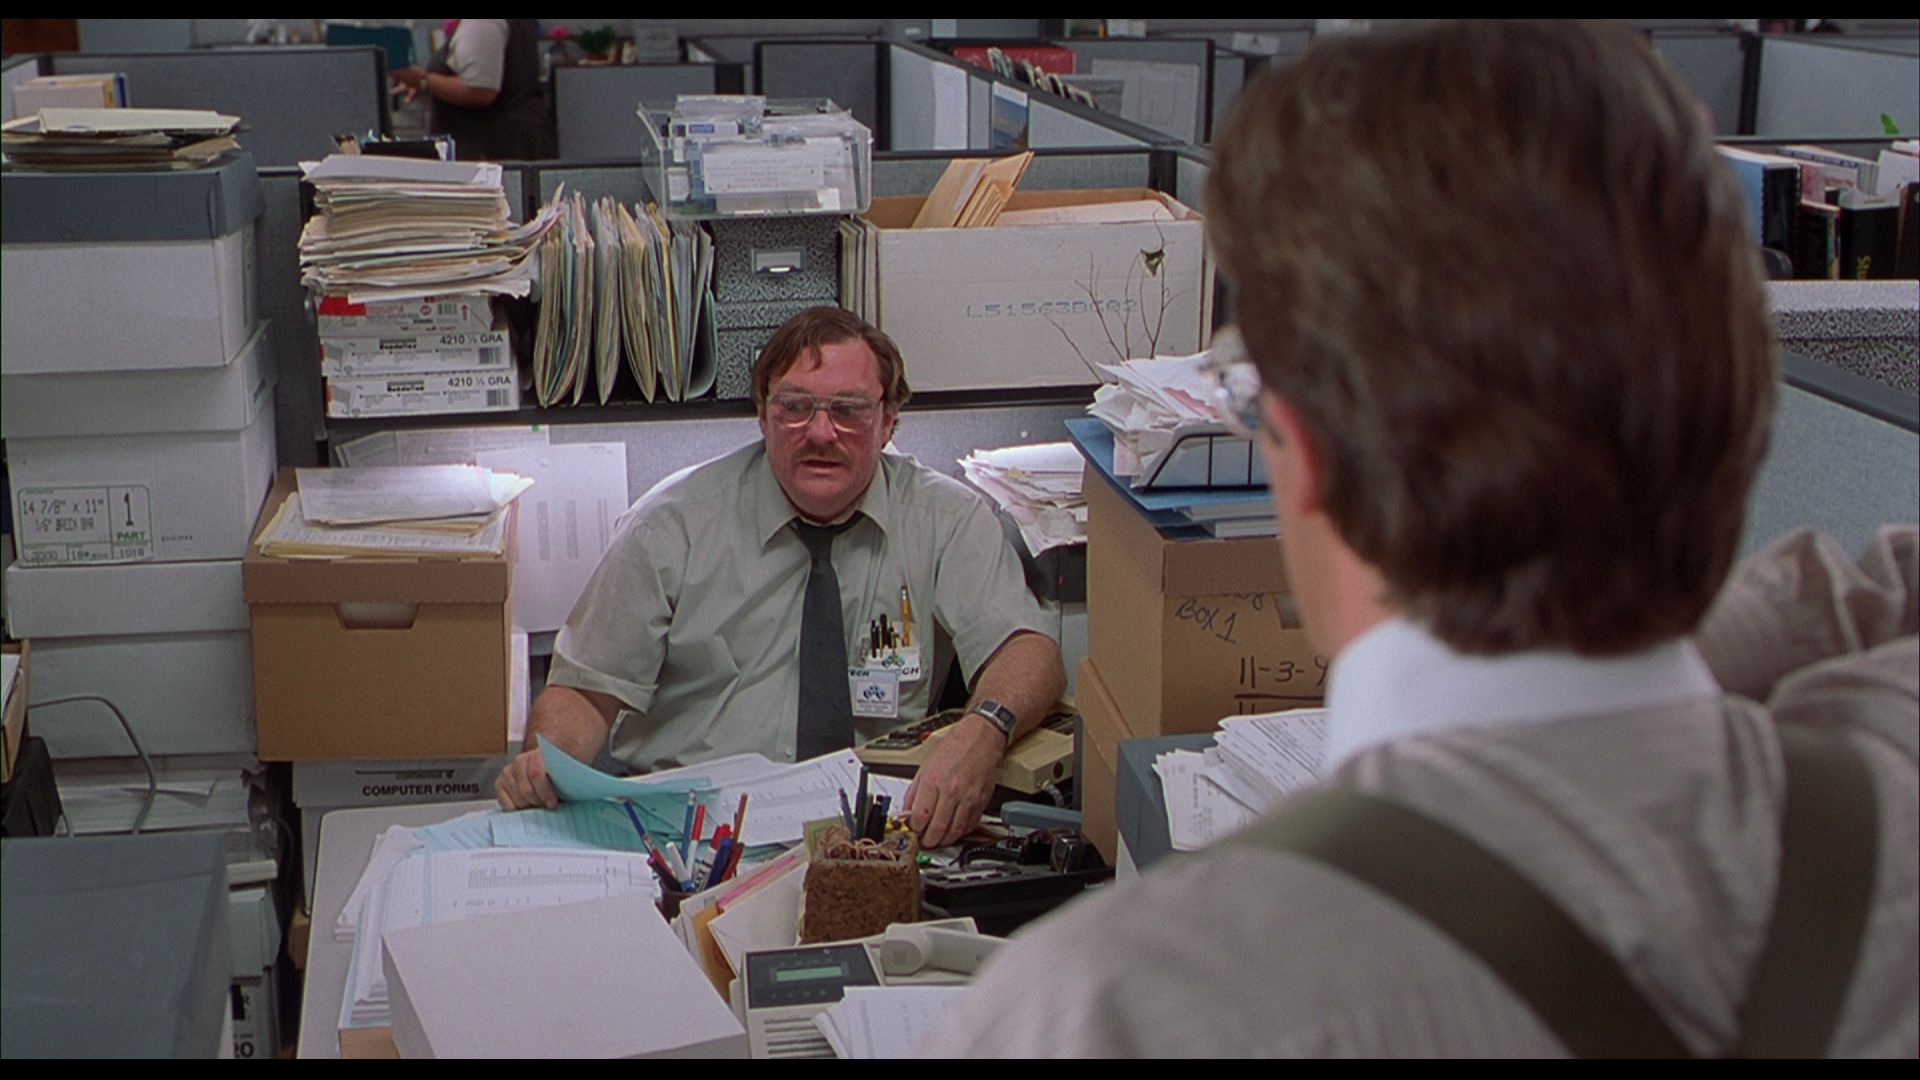 No "Office Space Milton Cubicle" memes have been featured yet. 